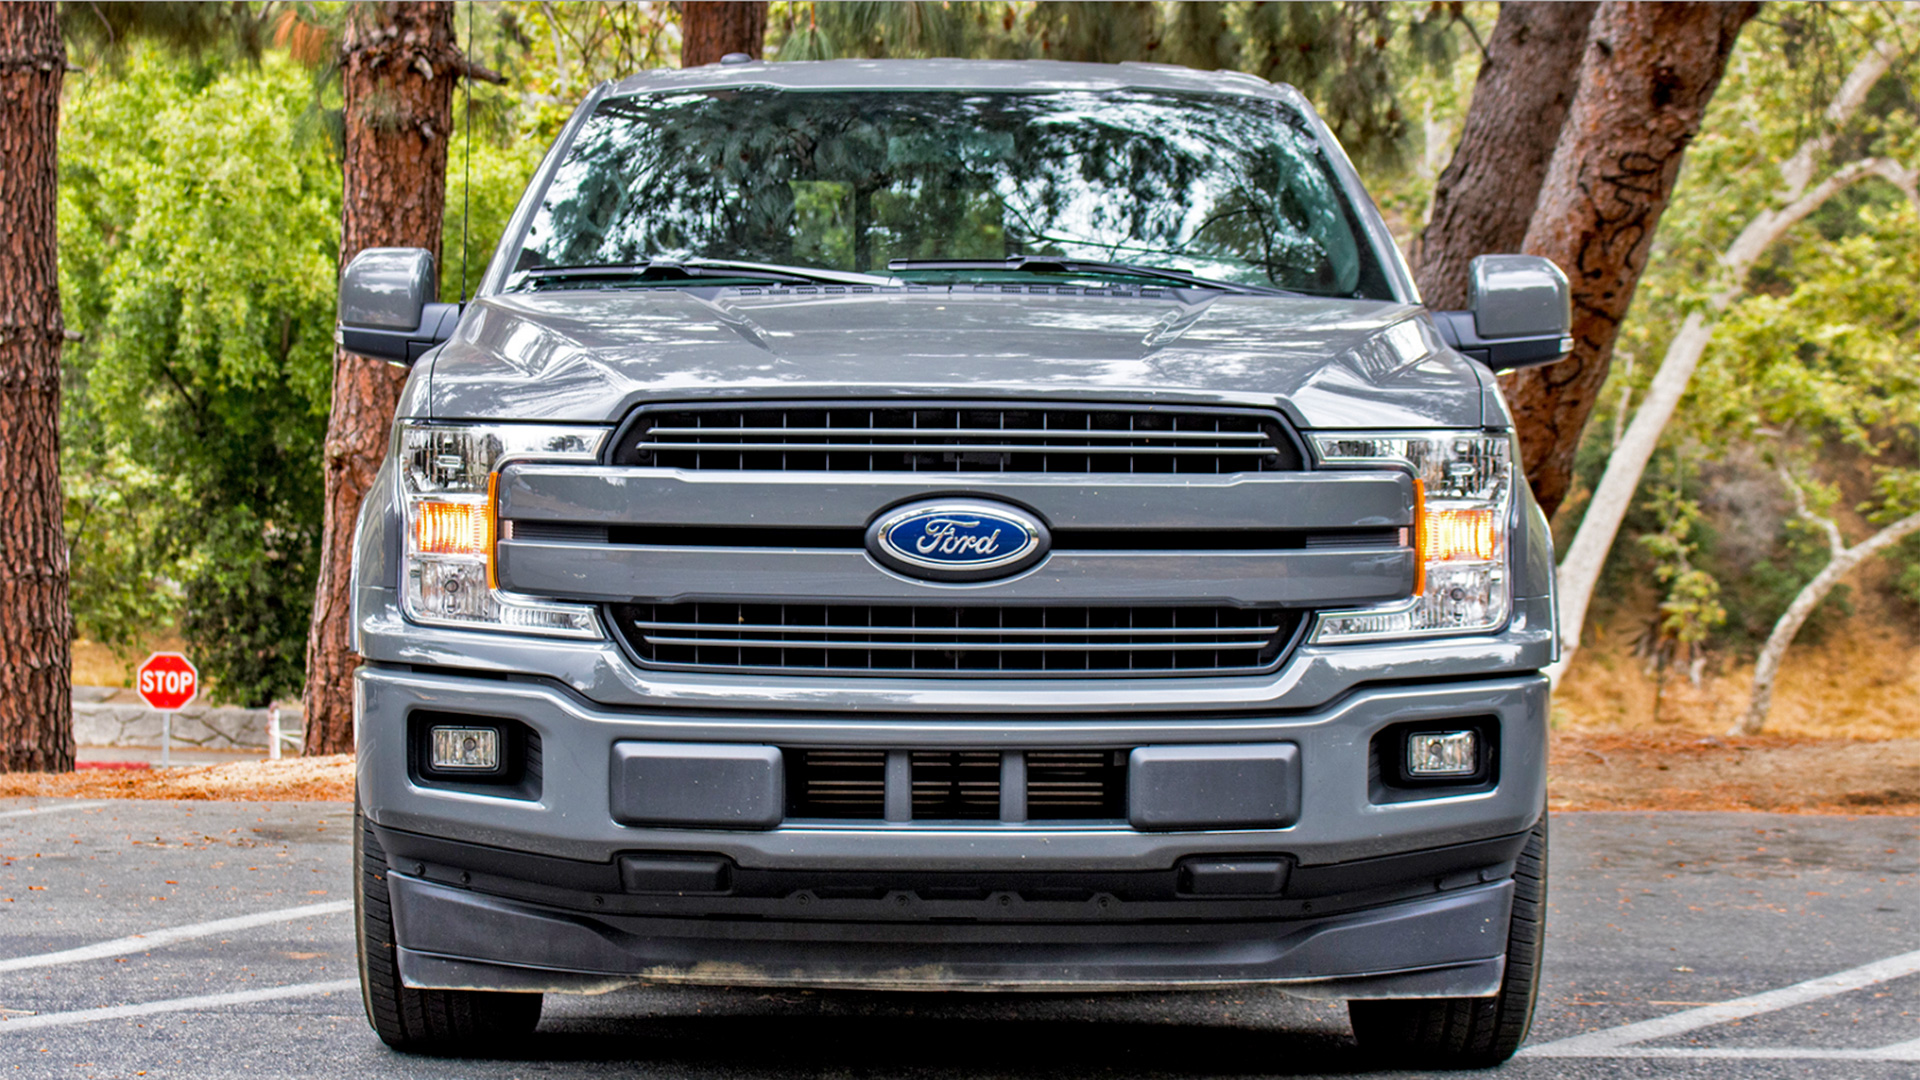 2018 Ford F-150 Diesel Review: How Does 850 Miles on a Tank Sound?